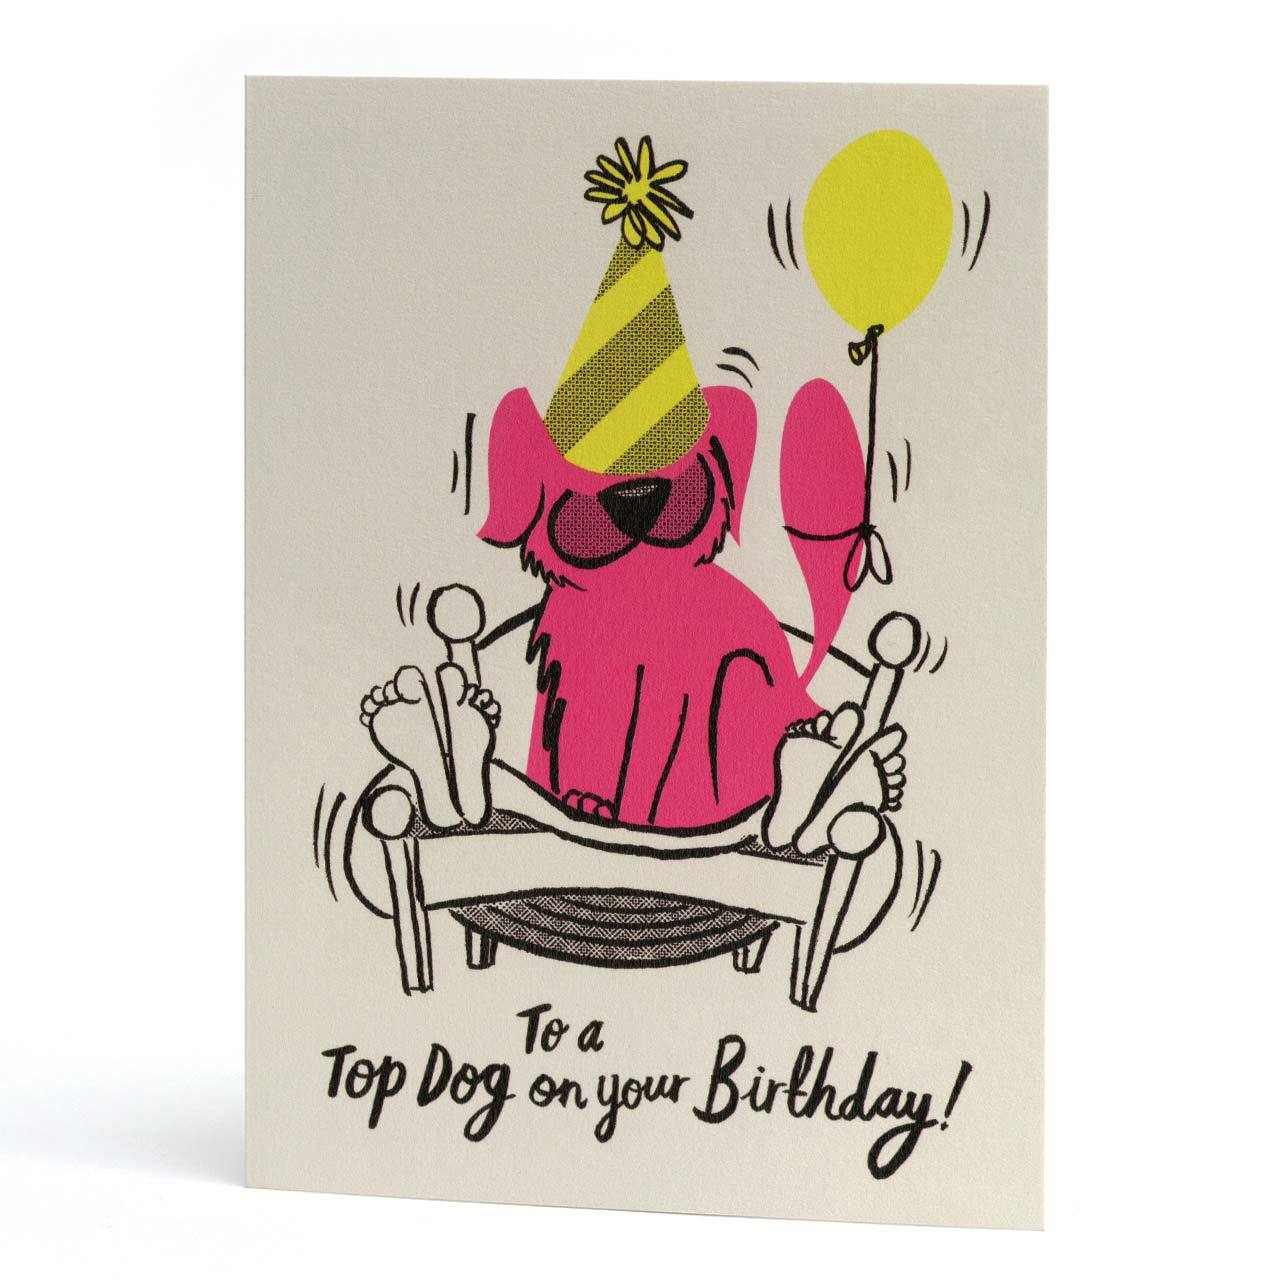 To a Top Dog Birthday Greeting Card